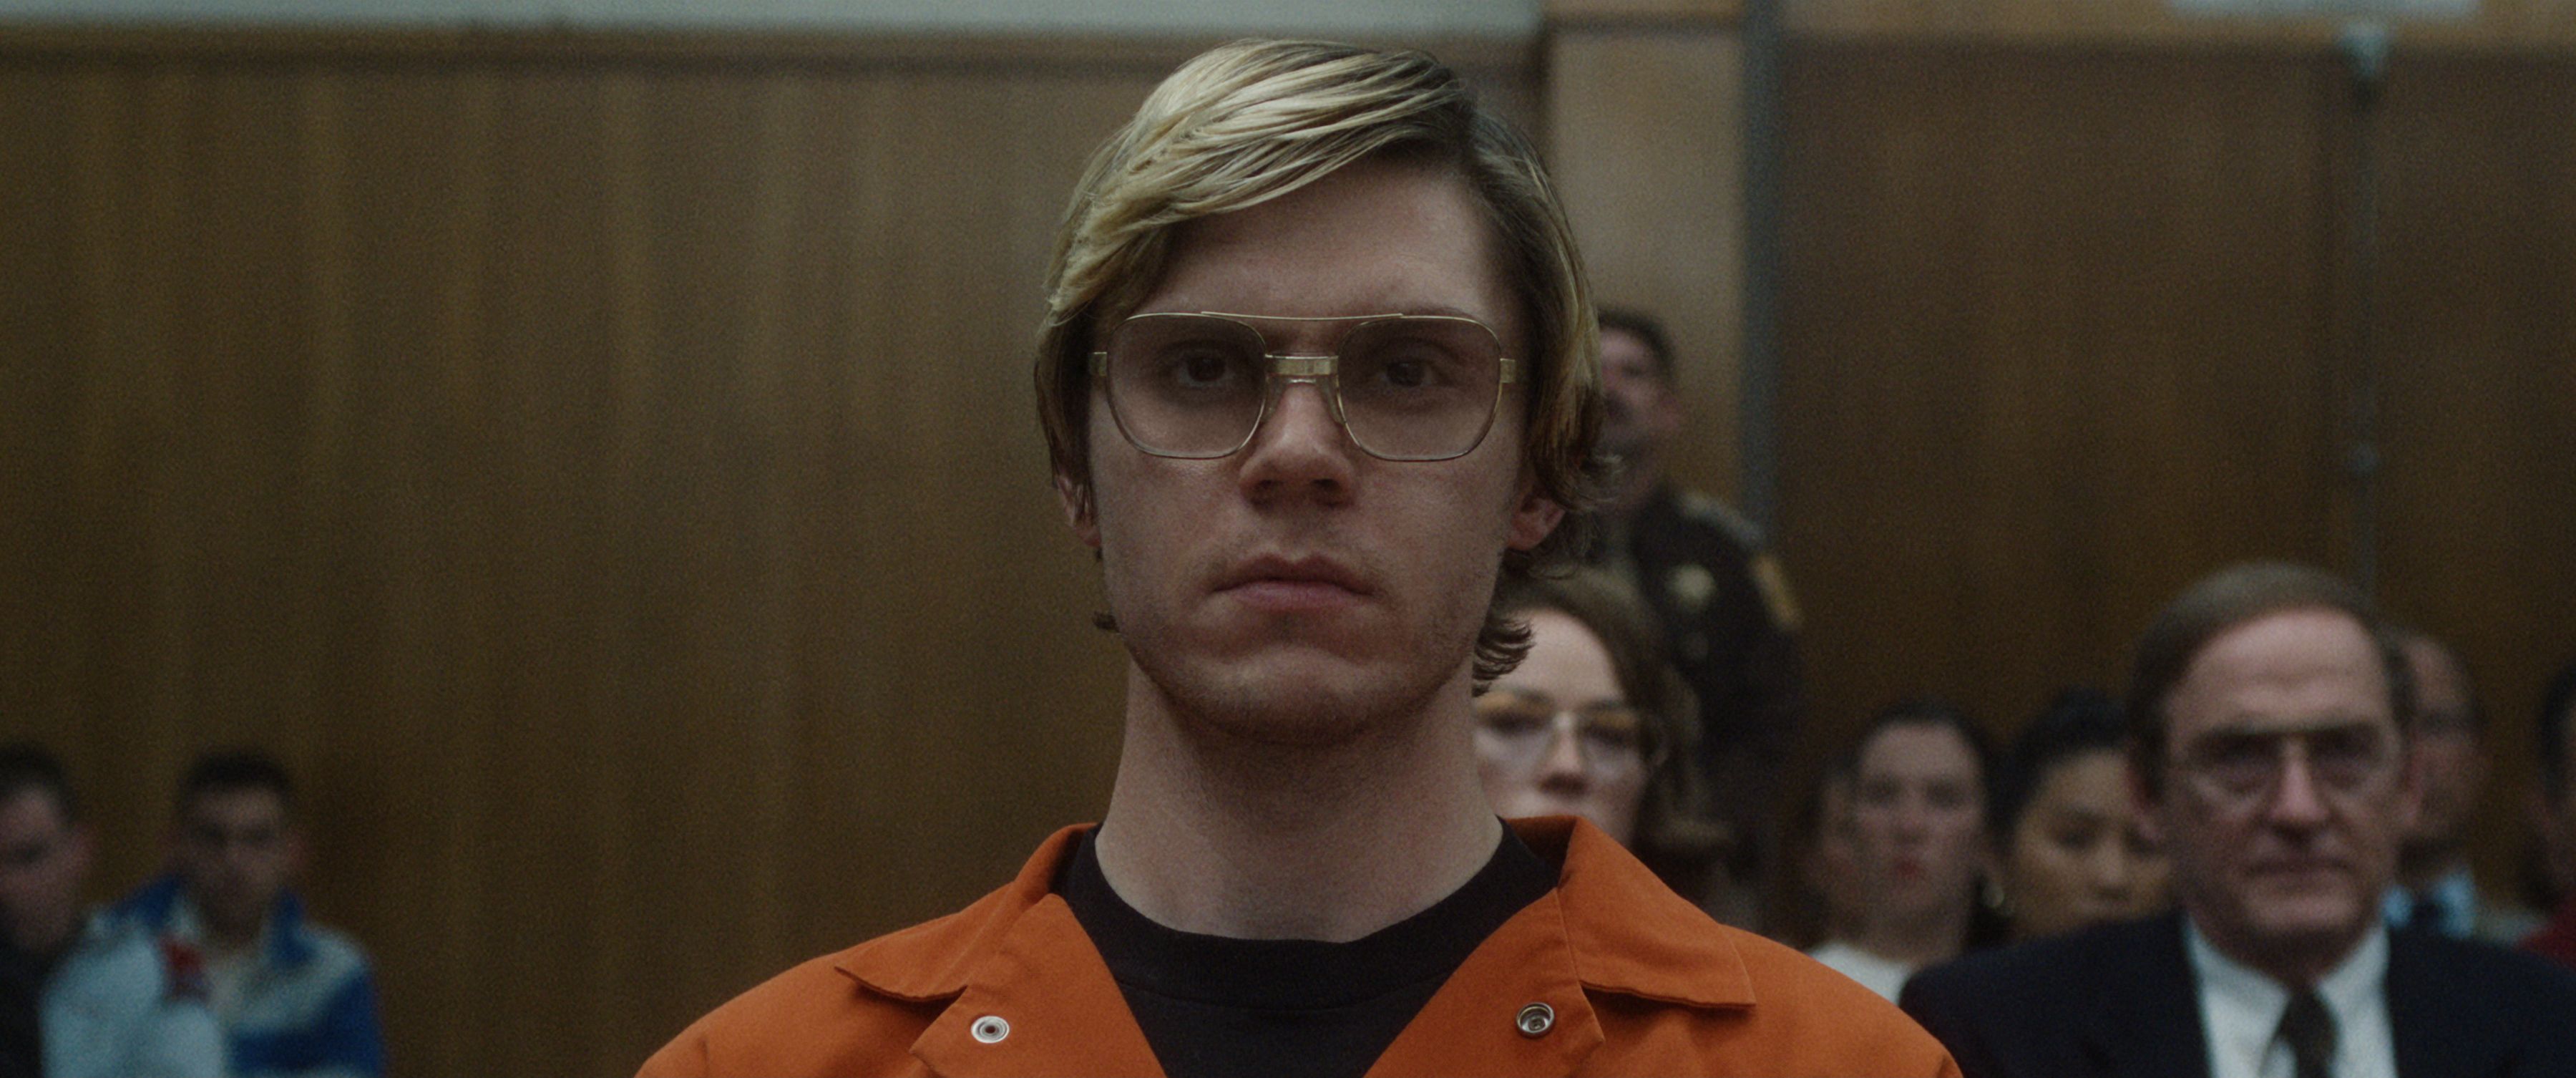 In a chilling series coming to Netflix tomorrow about the murder spree, American Horror Story actor Evan Peters plays the killer.